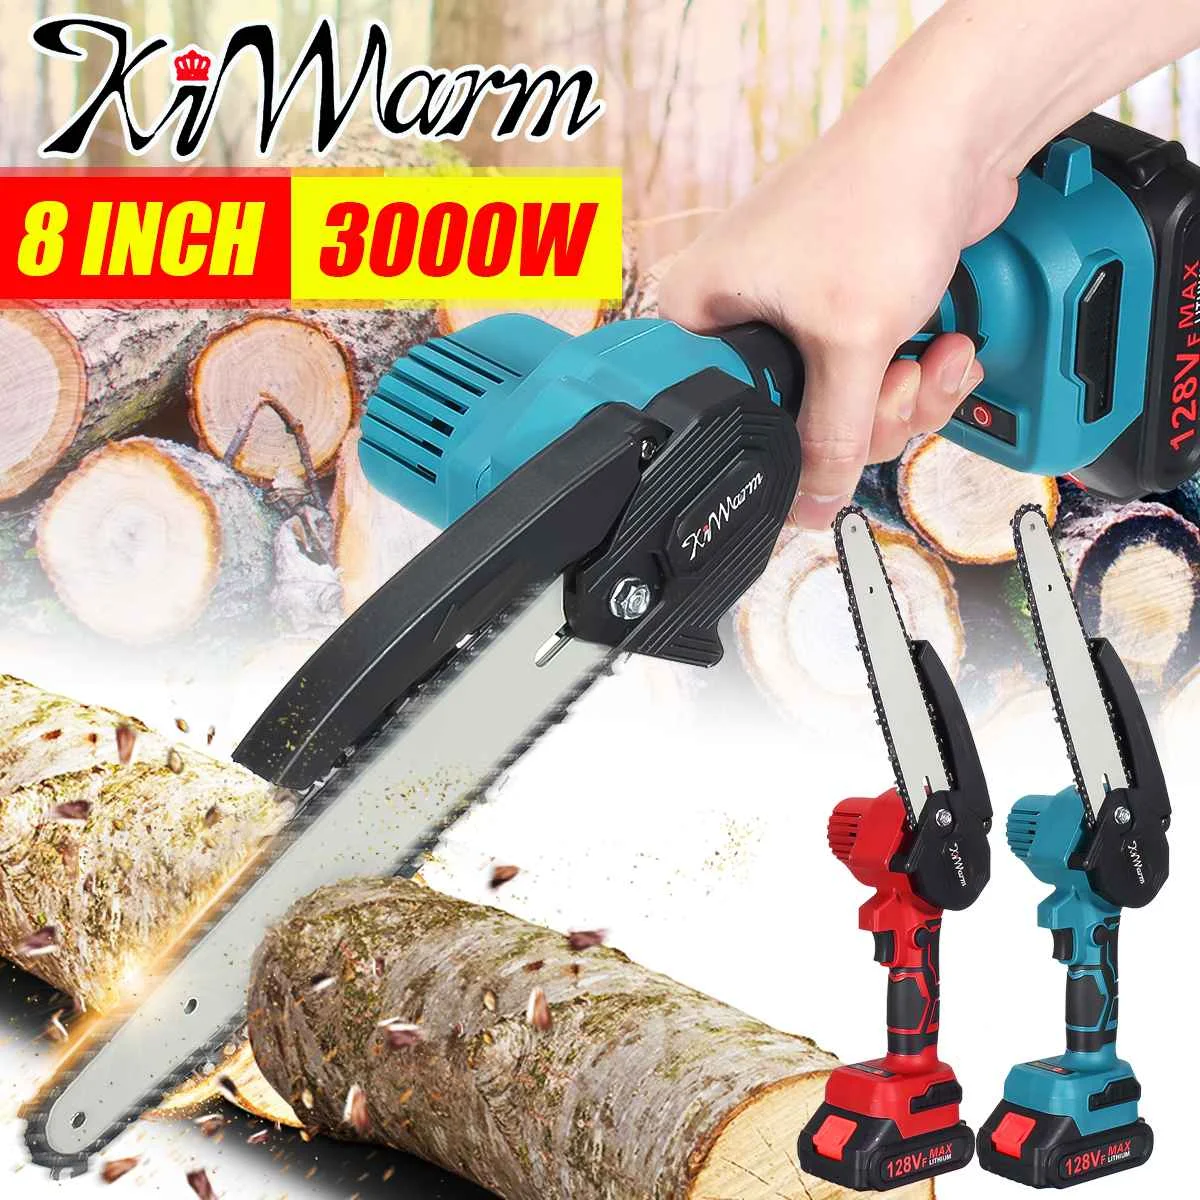 3000W 8 Inch Electric Chain Saws Brushless Wood Cutting Pruning ChainSaw Cordless Garden Tree Logging Saw For Makita 18V Battery